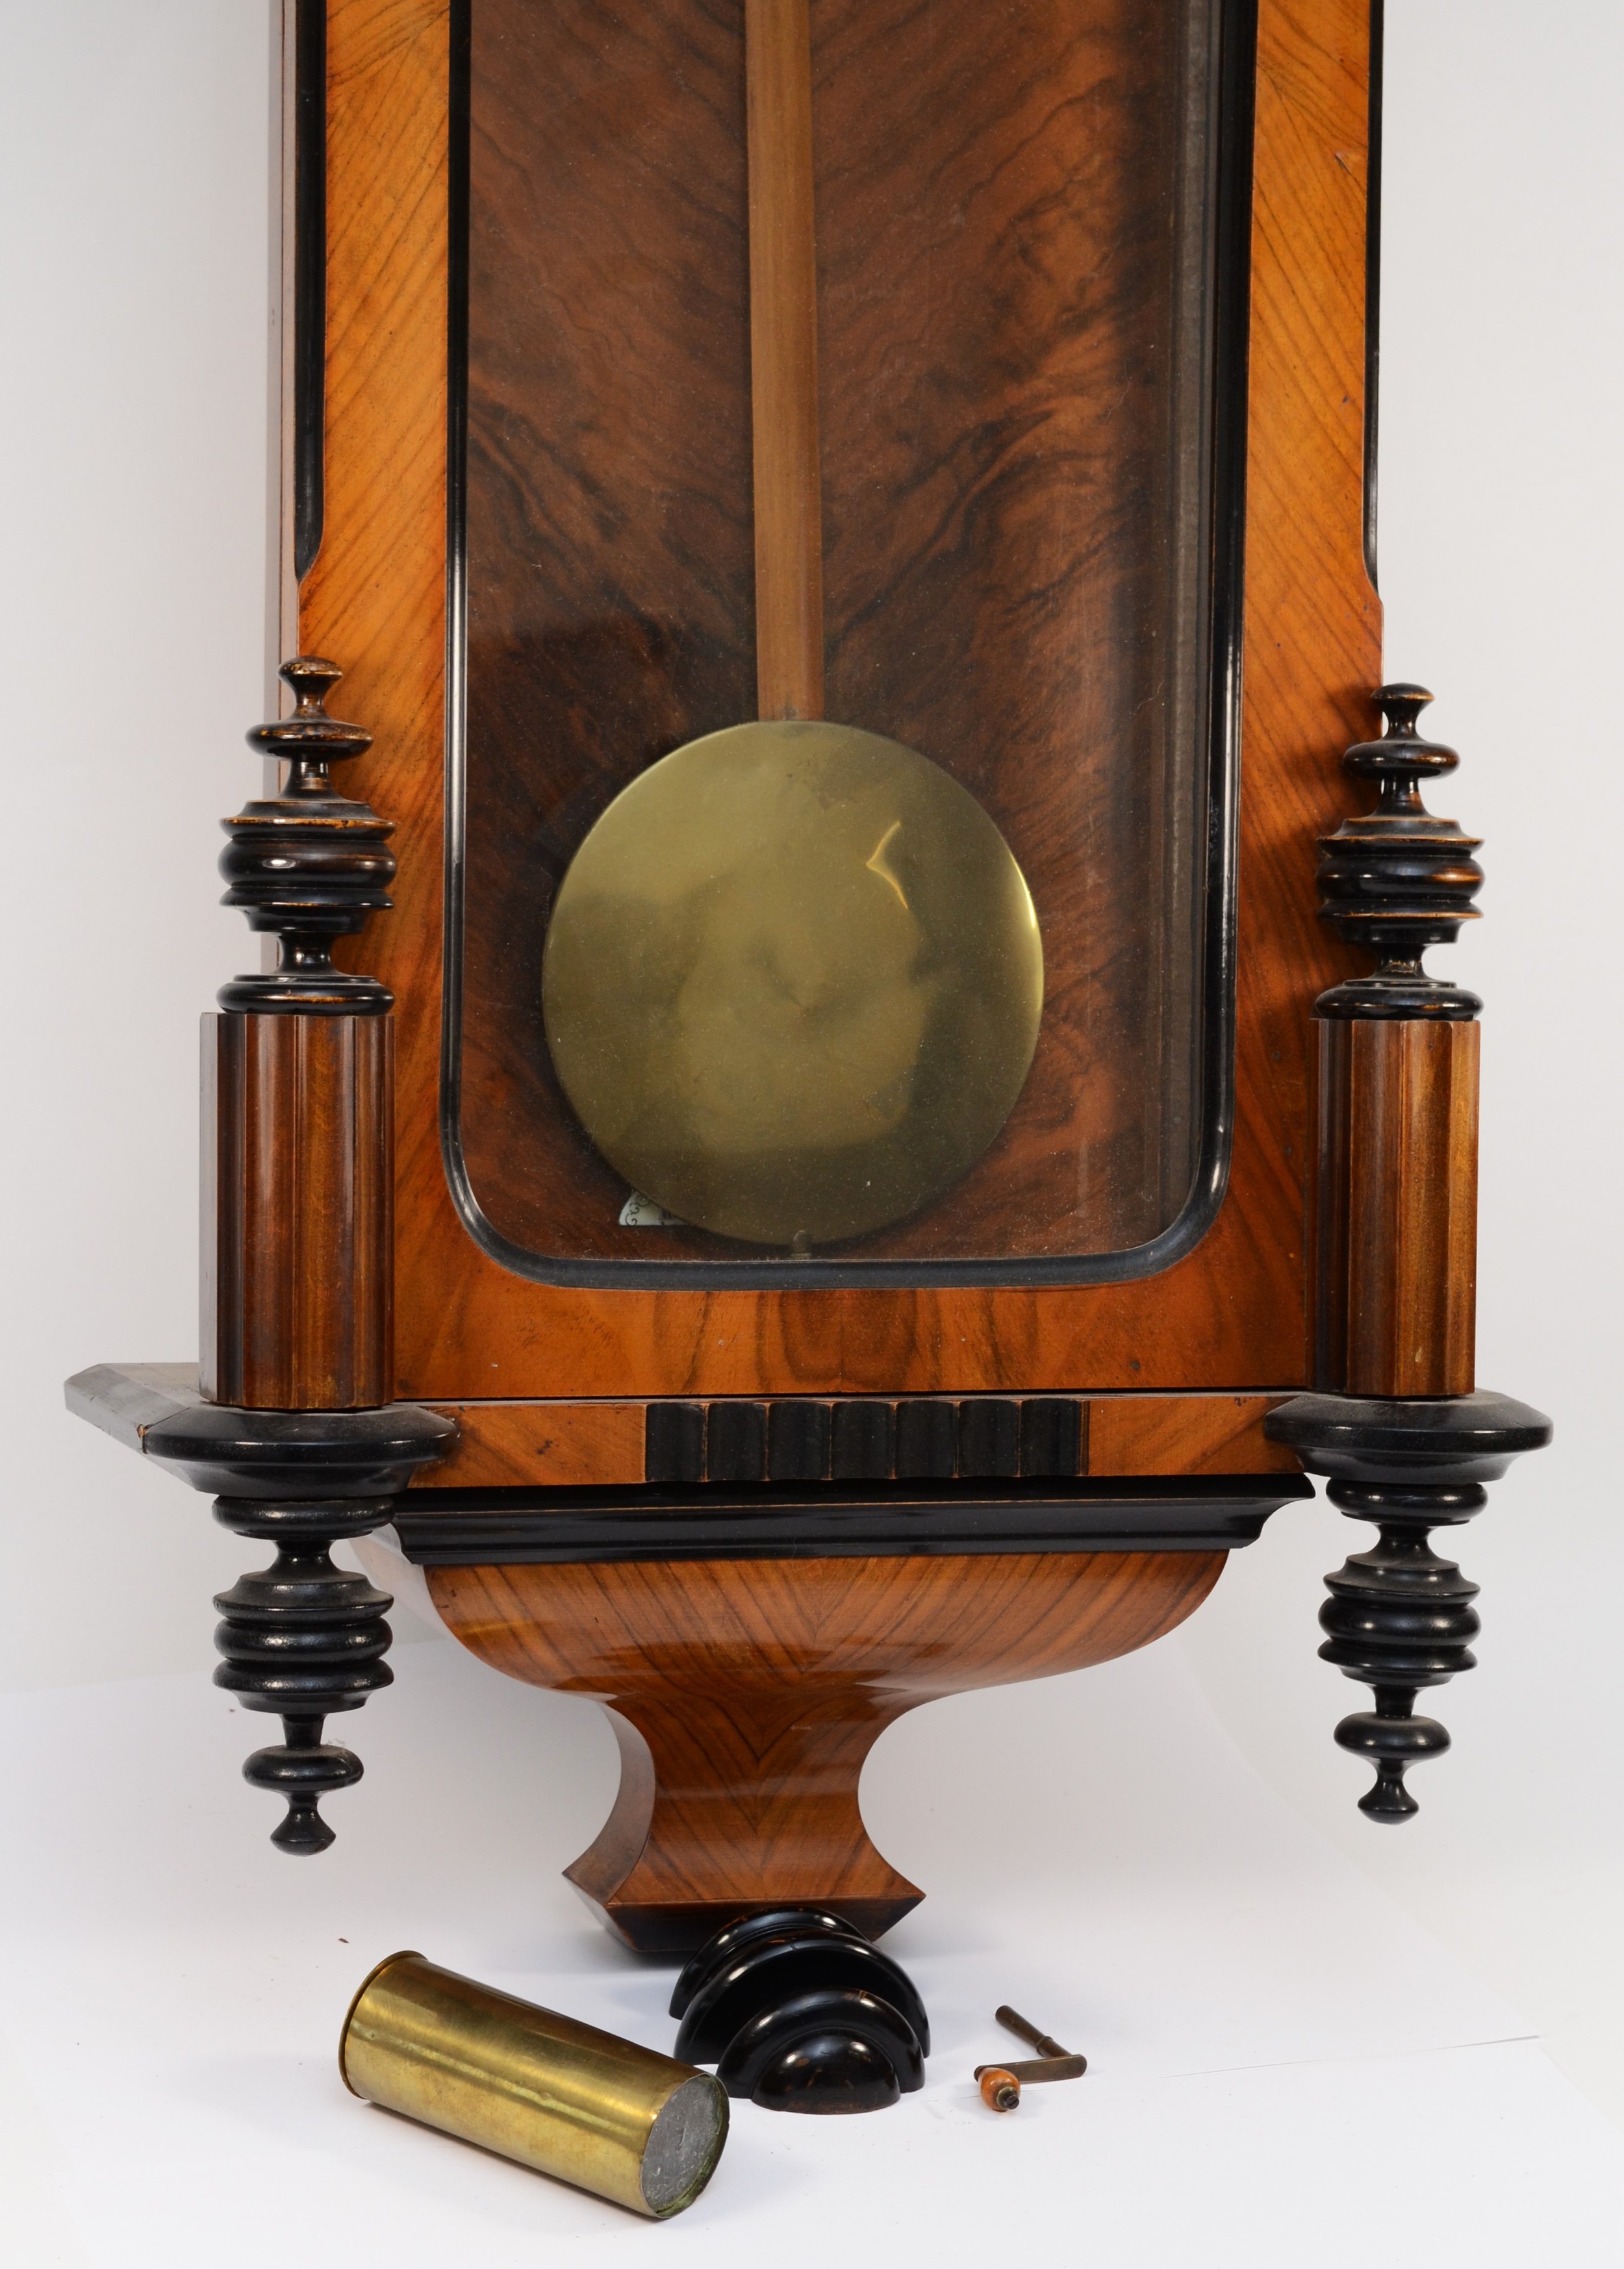 A late 19th century walnut and ebonised Vienna style wall clock, with carved pediment and finials, - Image 2 of 3